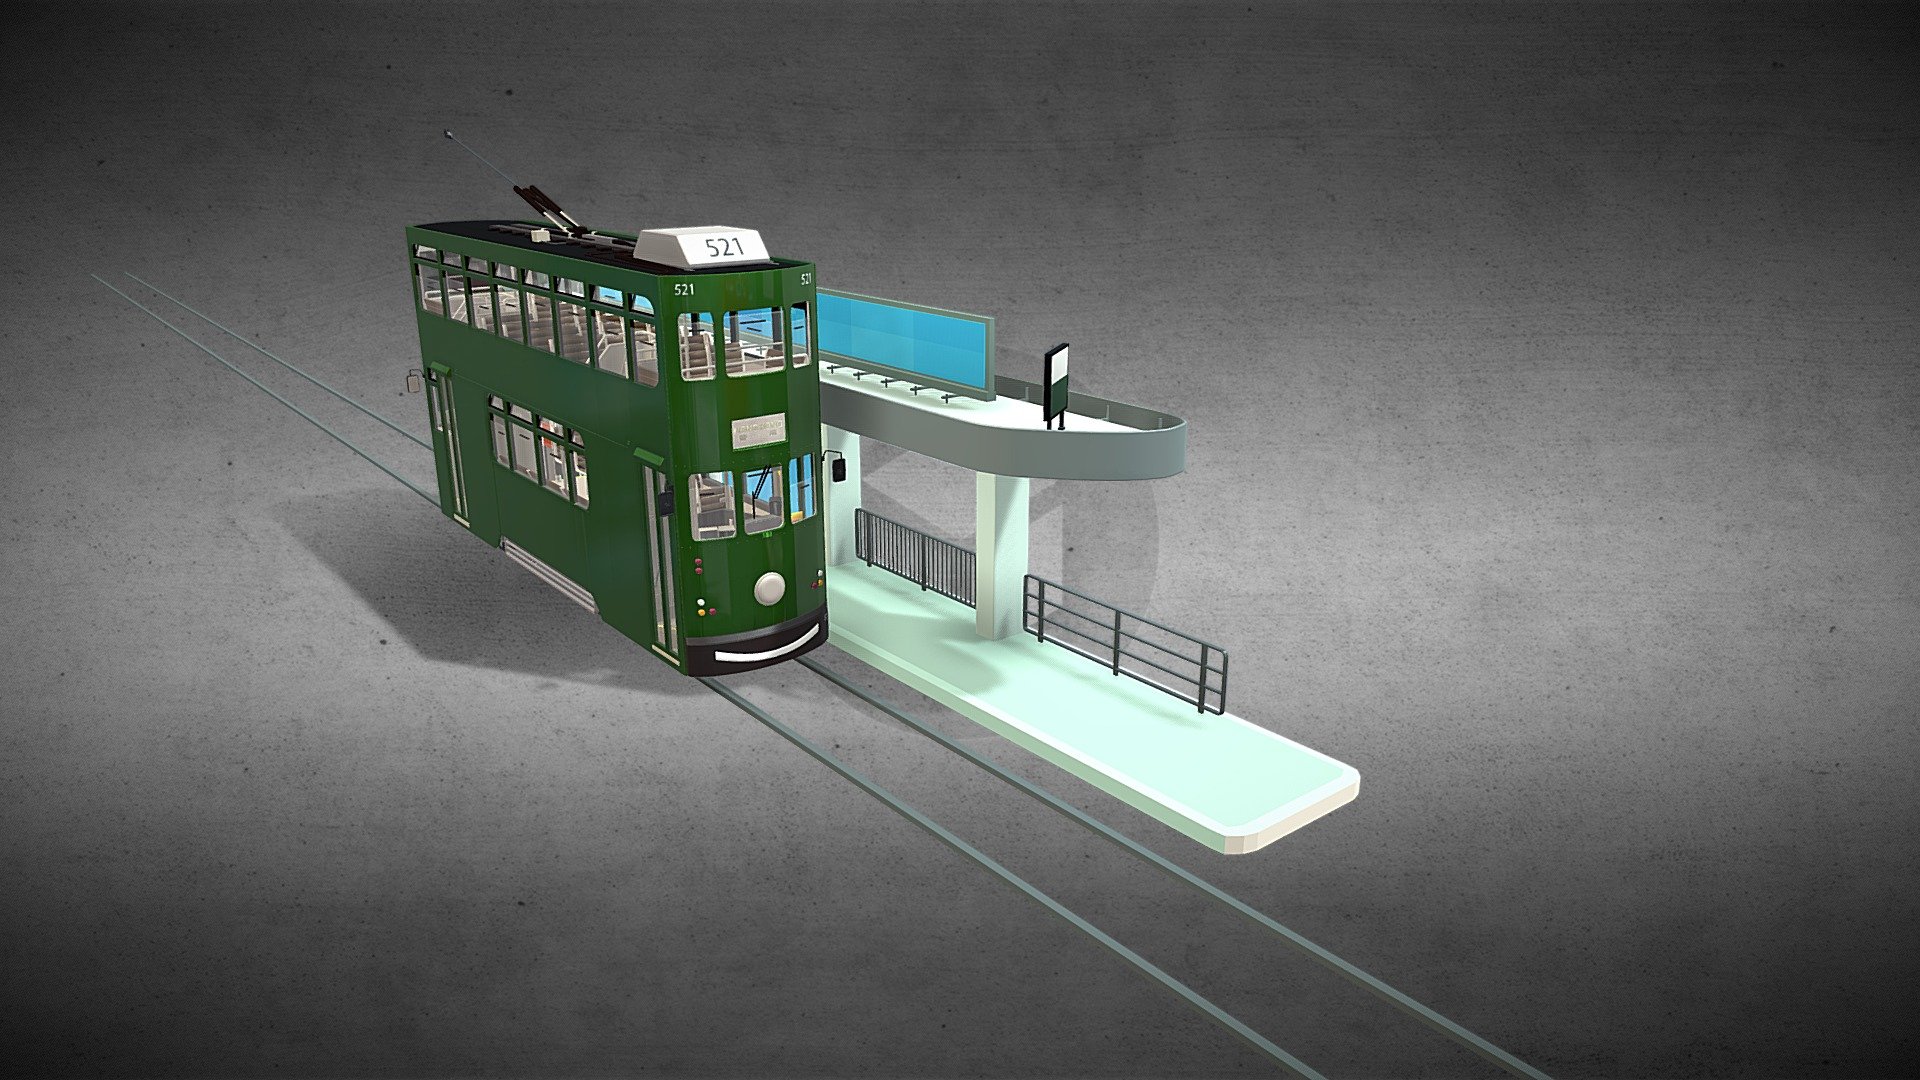 This is a Hong Kong Tram 
This model includes a tram station.

Wiki below for more information.
https://en.wikipedia.org/wiki/Hong_Kong_Tramways

The tram model has 4 doors and 2 wheels, around 140000 Verts and Faces. This model has separated windows, bodies, chairs, stairs, wheels, lights, doors, and other things. You can change the surface color easily.

This model is a game-ready asset, tested in Unity and Blender.
If you need blend file, please buy it from my website: businessyuen.com

My other models

Drink Pack

HongKong Bus 

MiniBus

Free Model Doll

Play my game here https://businessyuen.itch.io/hong-kong-bus-driving - Hong Kong Tram - Buy Royalty Free 3D model by businessyuen 3d model